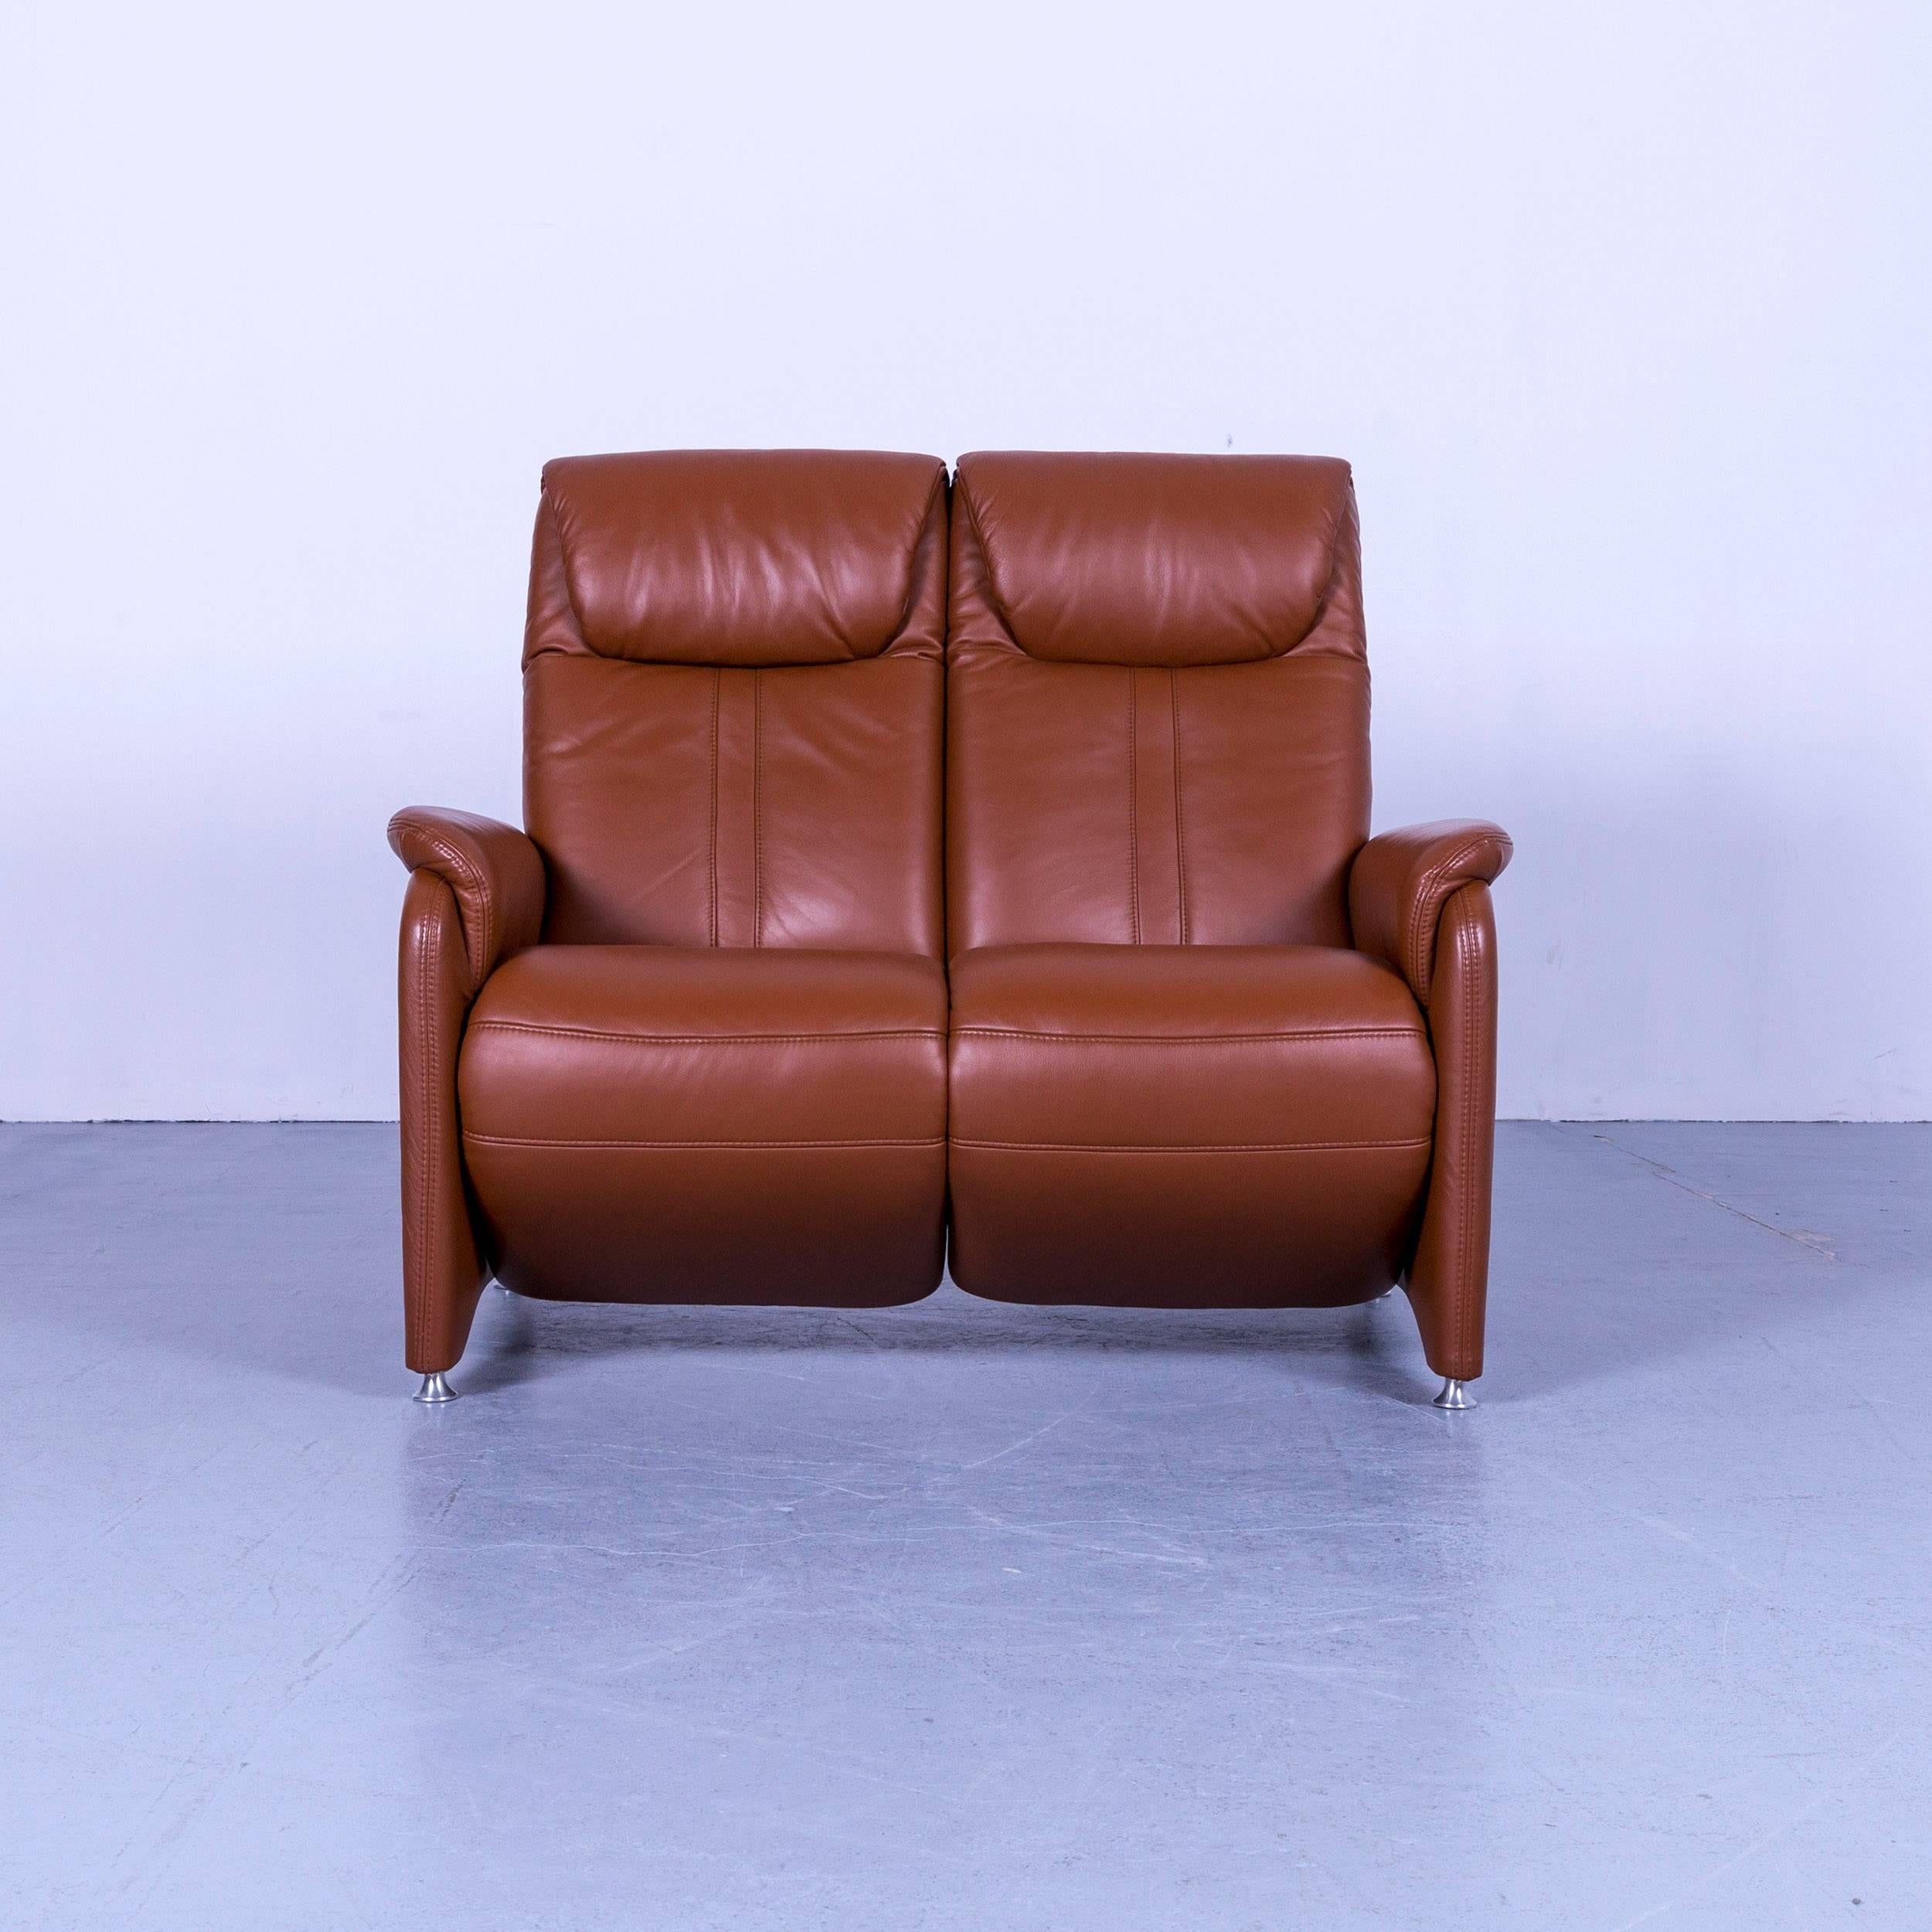 Willy Schillig Designer Leather Sofa Brown Two-Seat Recliner For Sale 3